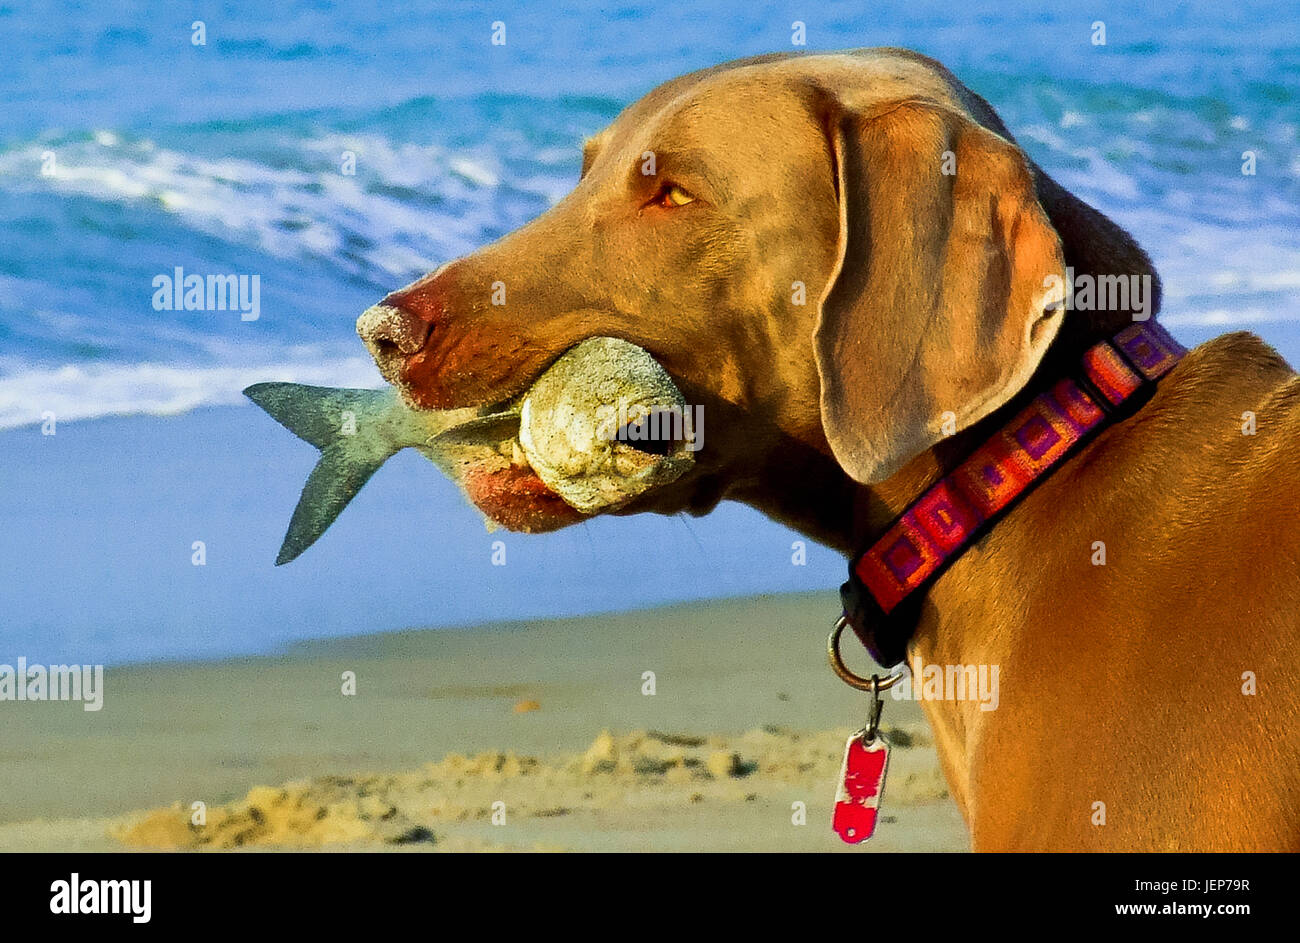 Dog with fish in mouth at beach Stock Photo